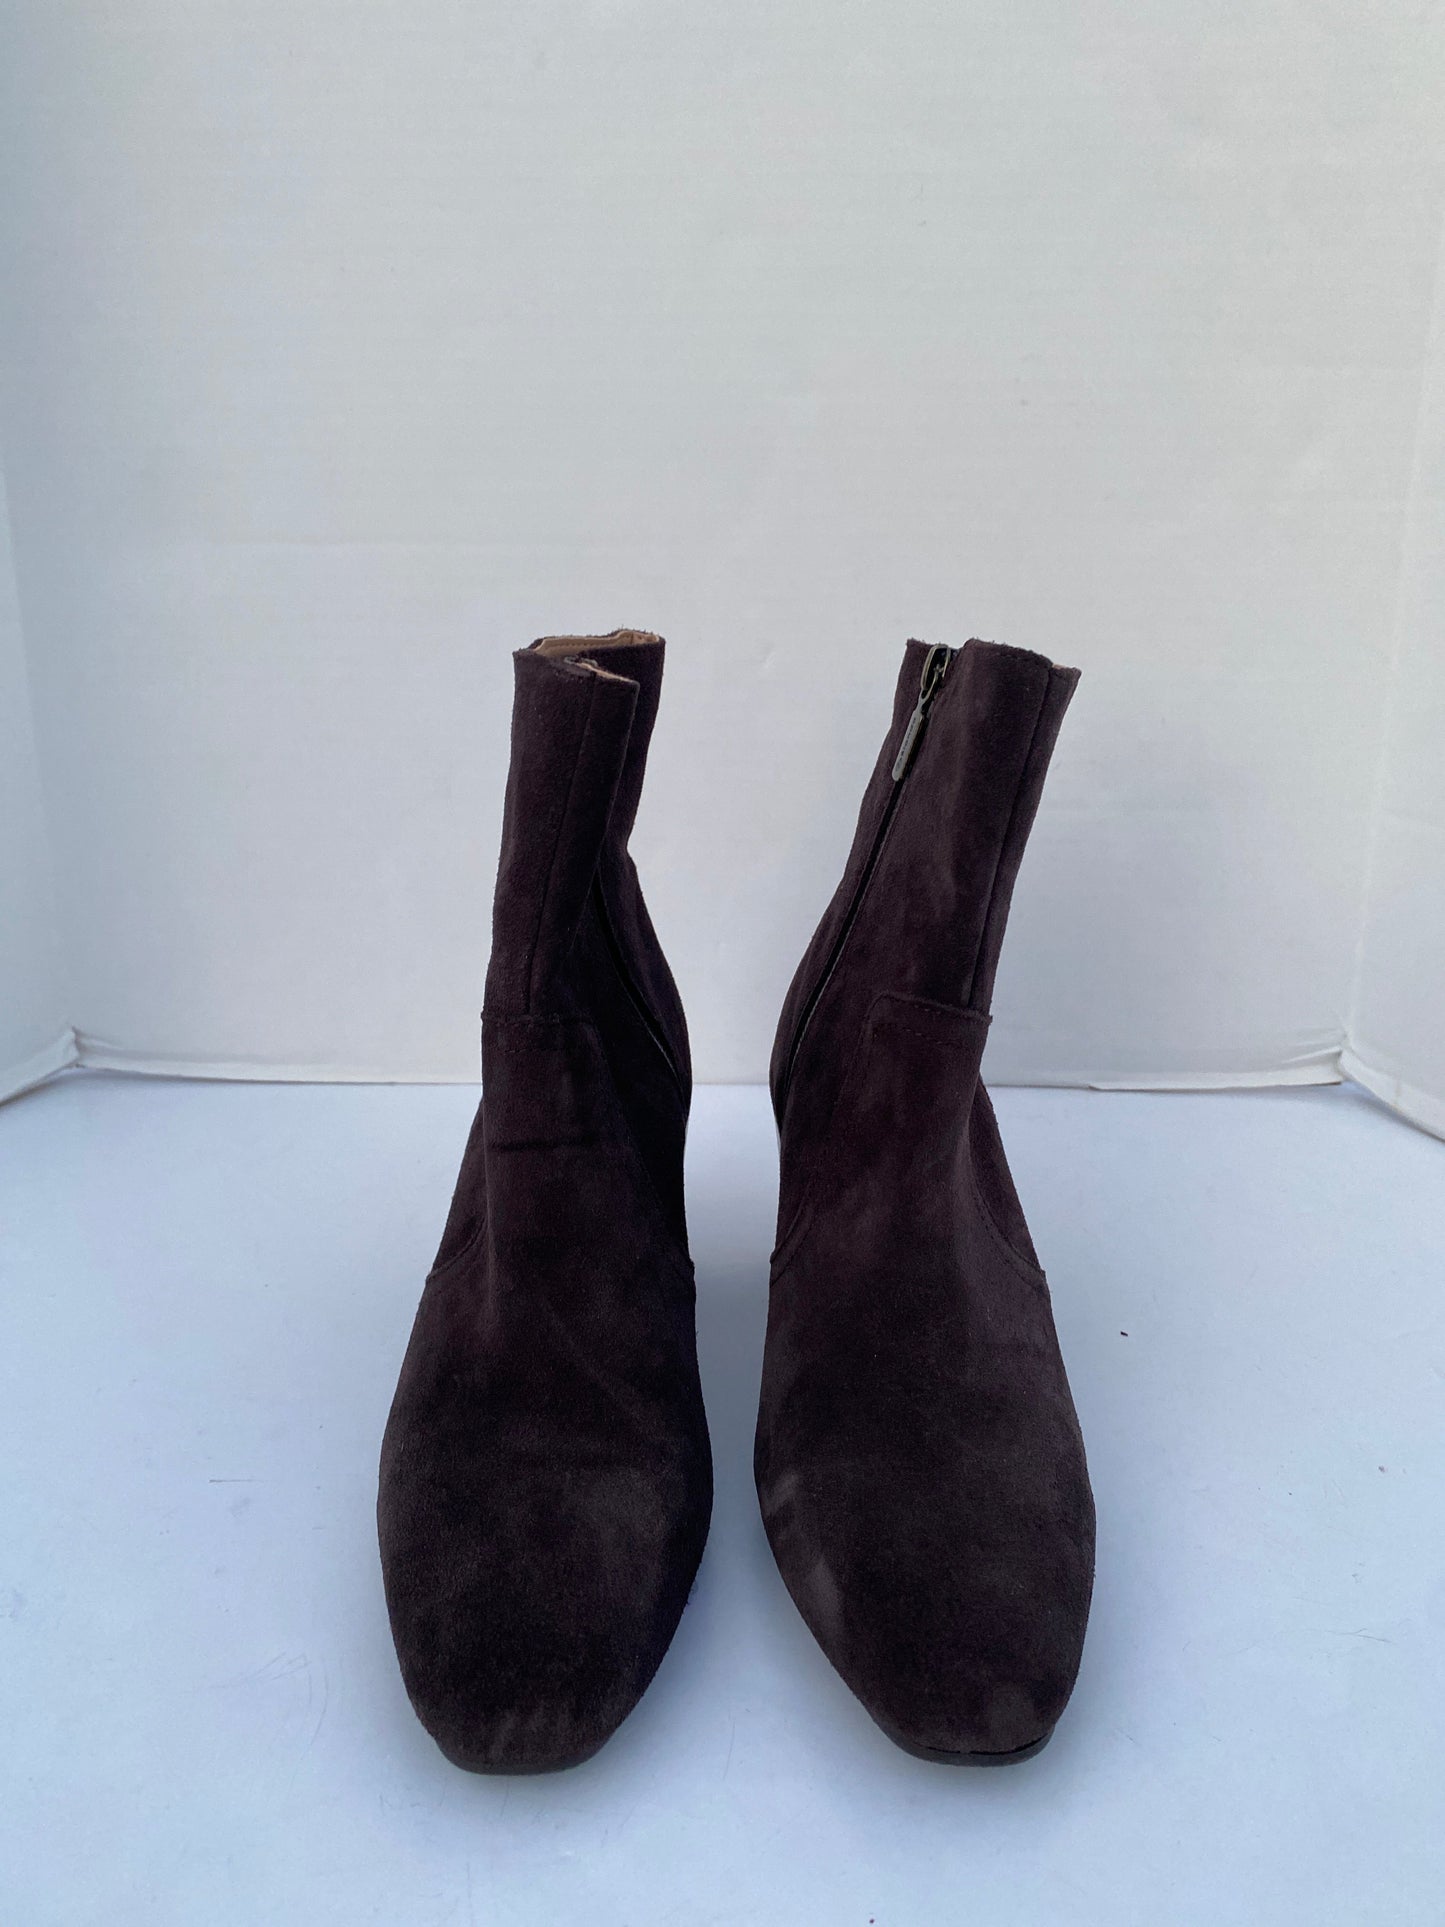 Grey Boots Ankle Heels Blondo, Size 7.5